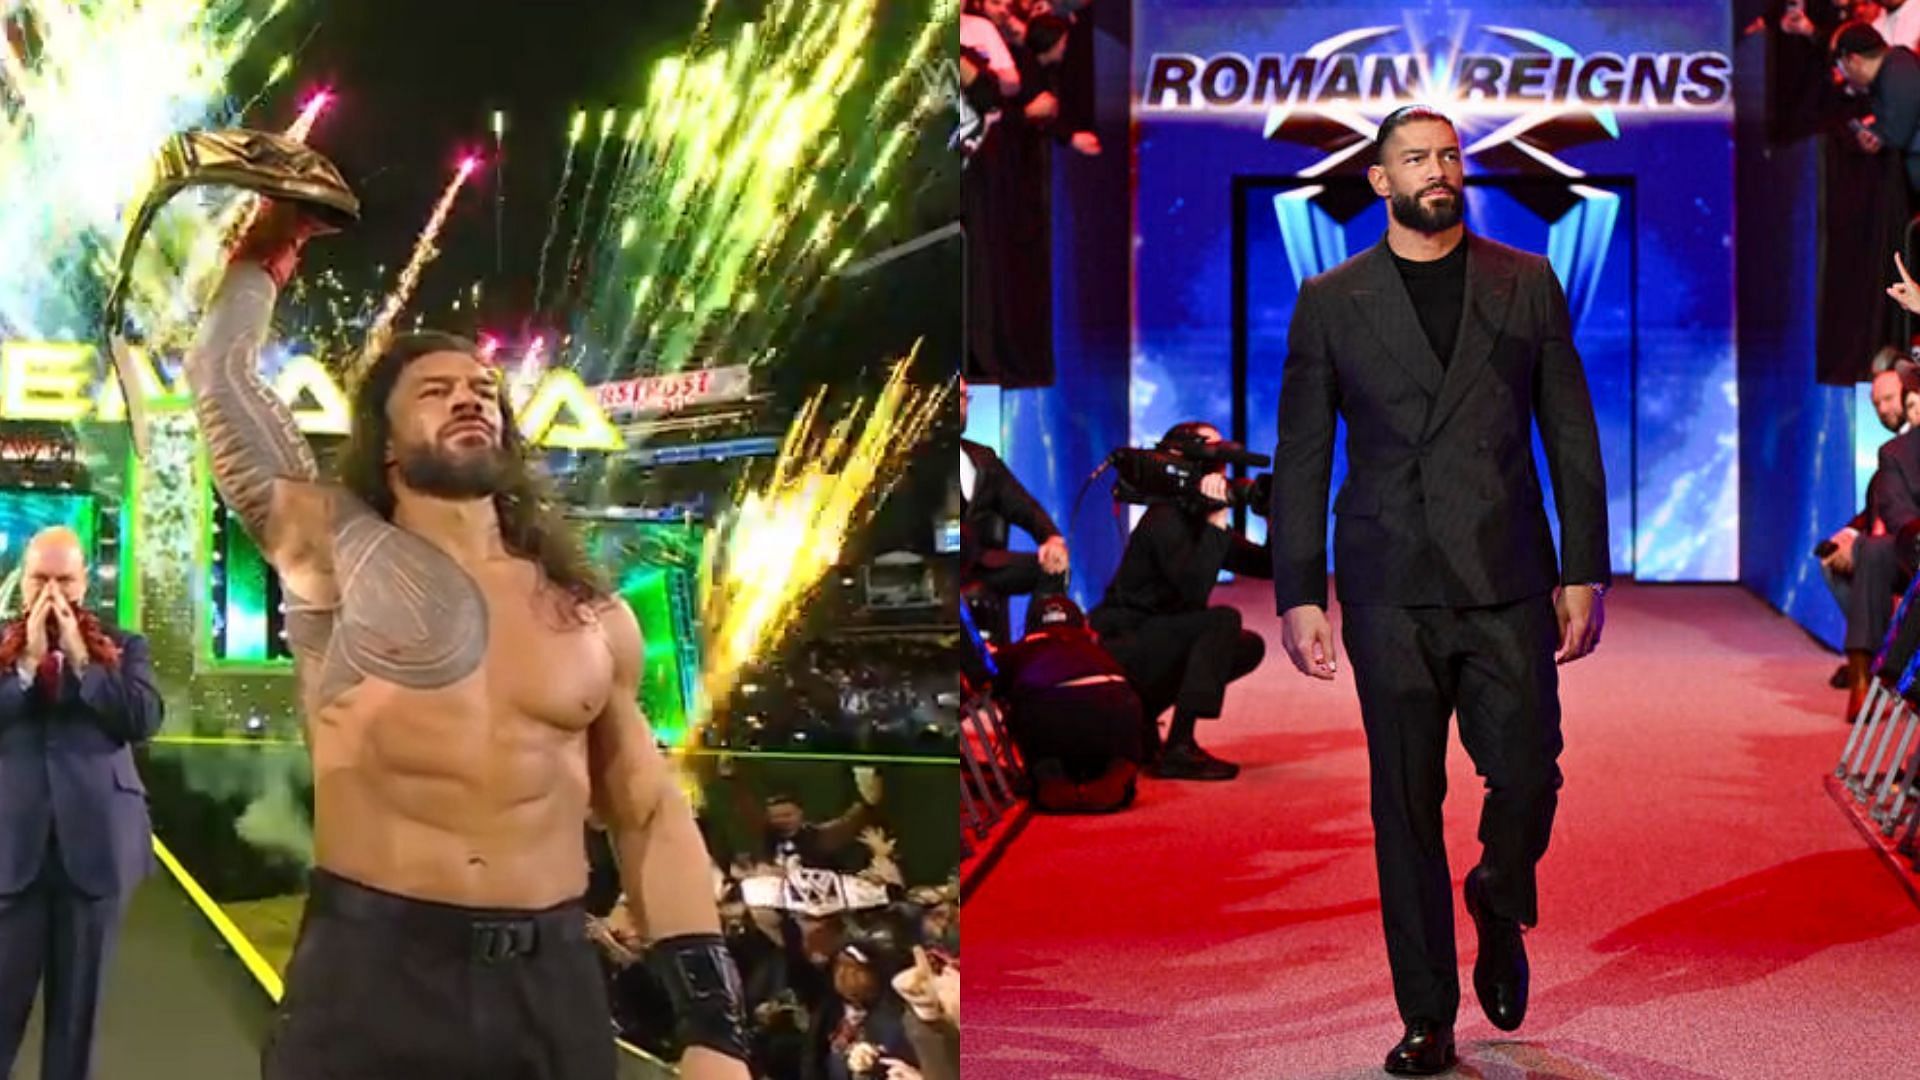 Roman Reigns and The Rock were victorious on Night 1 of WrestleMania 40